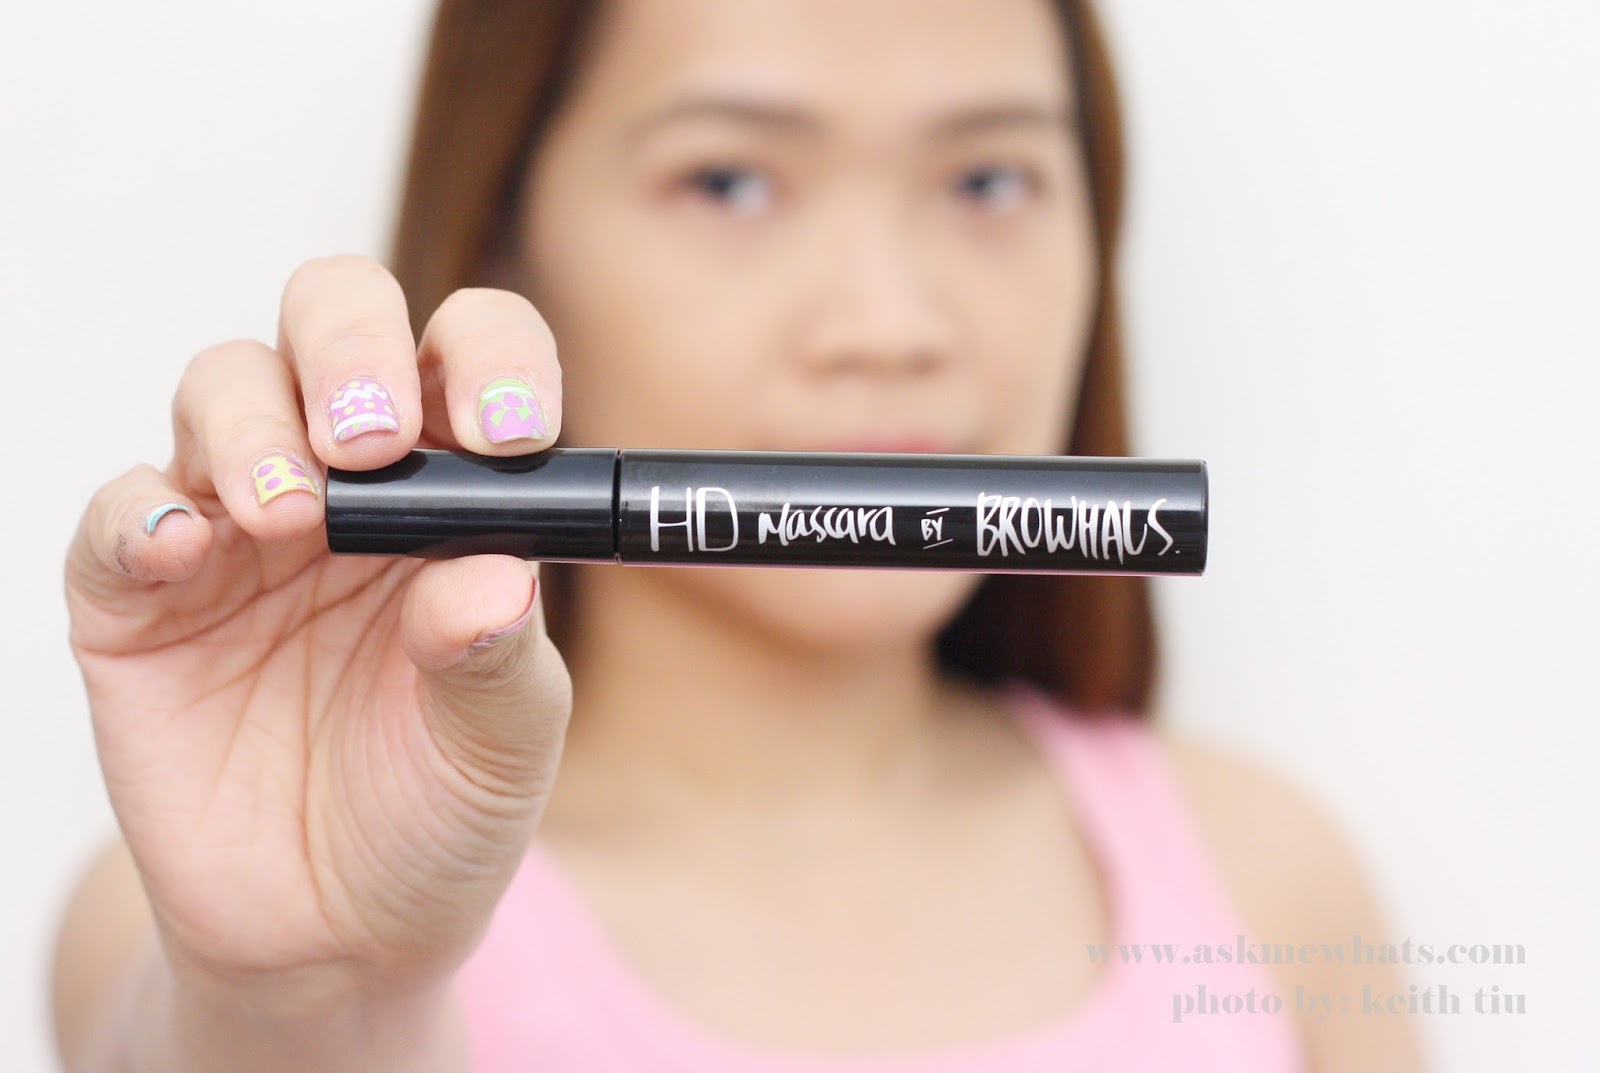 HD Mascara by Browhaus review